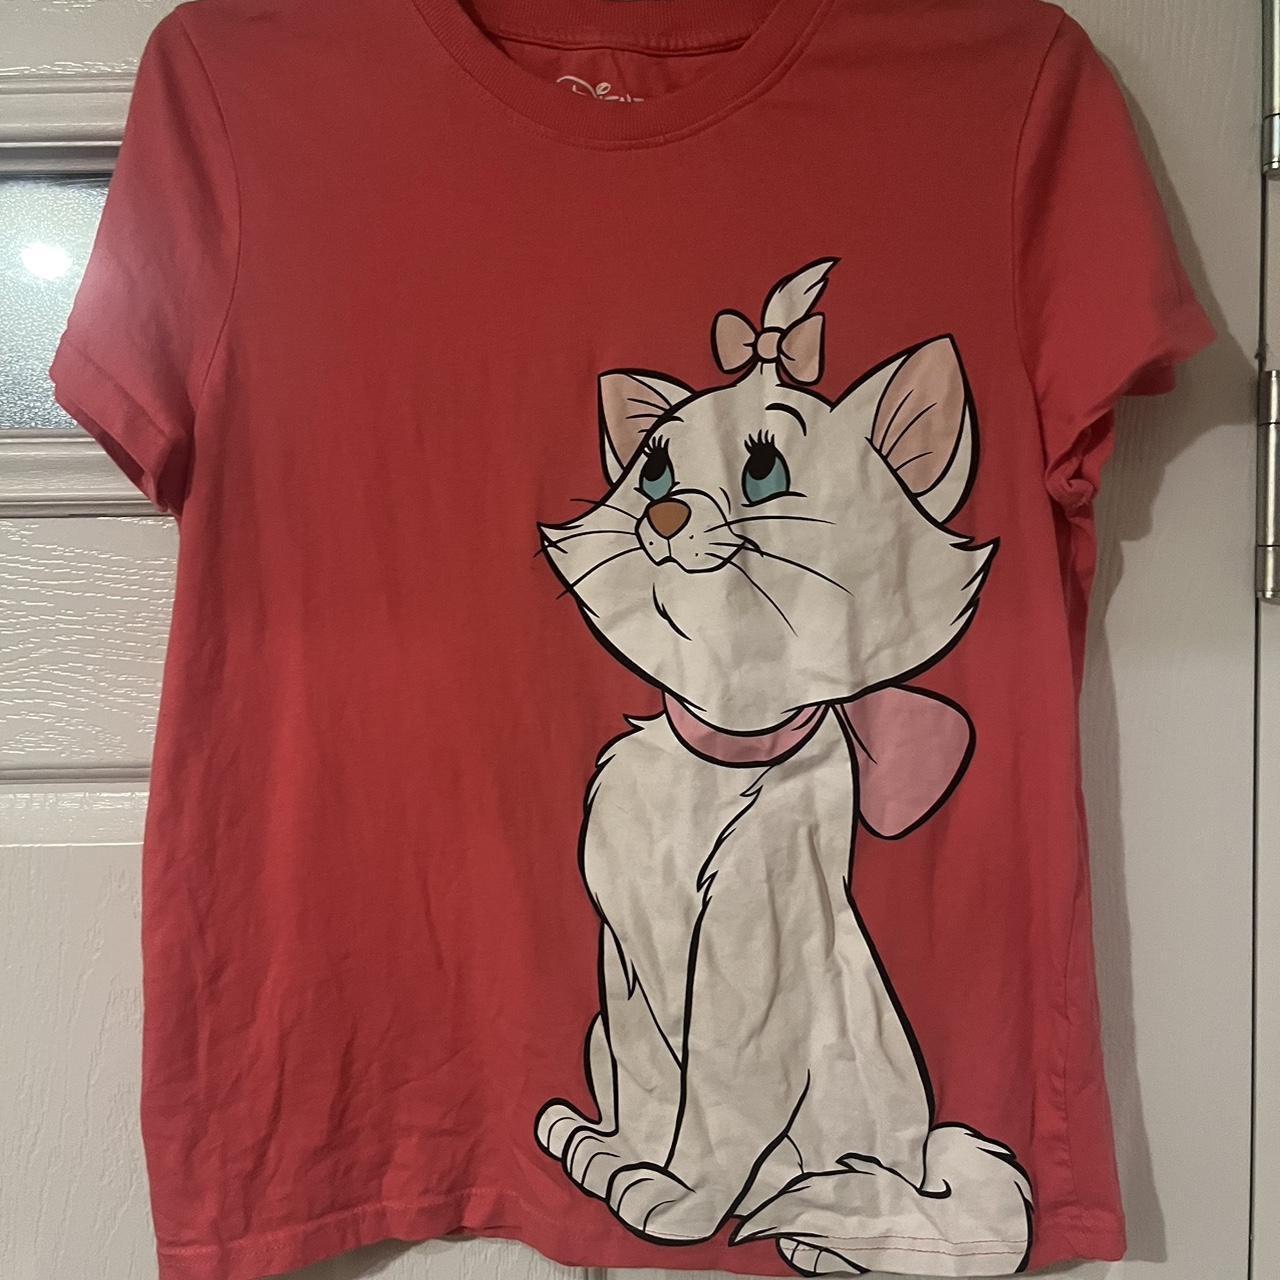 Pink Disney Primark t shirt top, Marie the cat from...